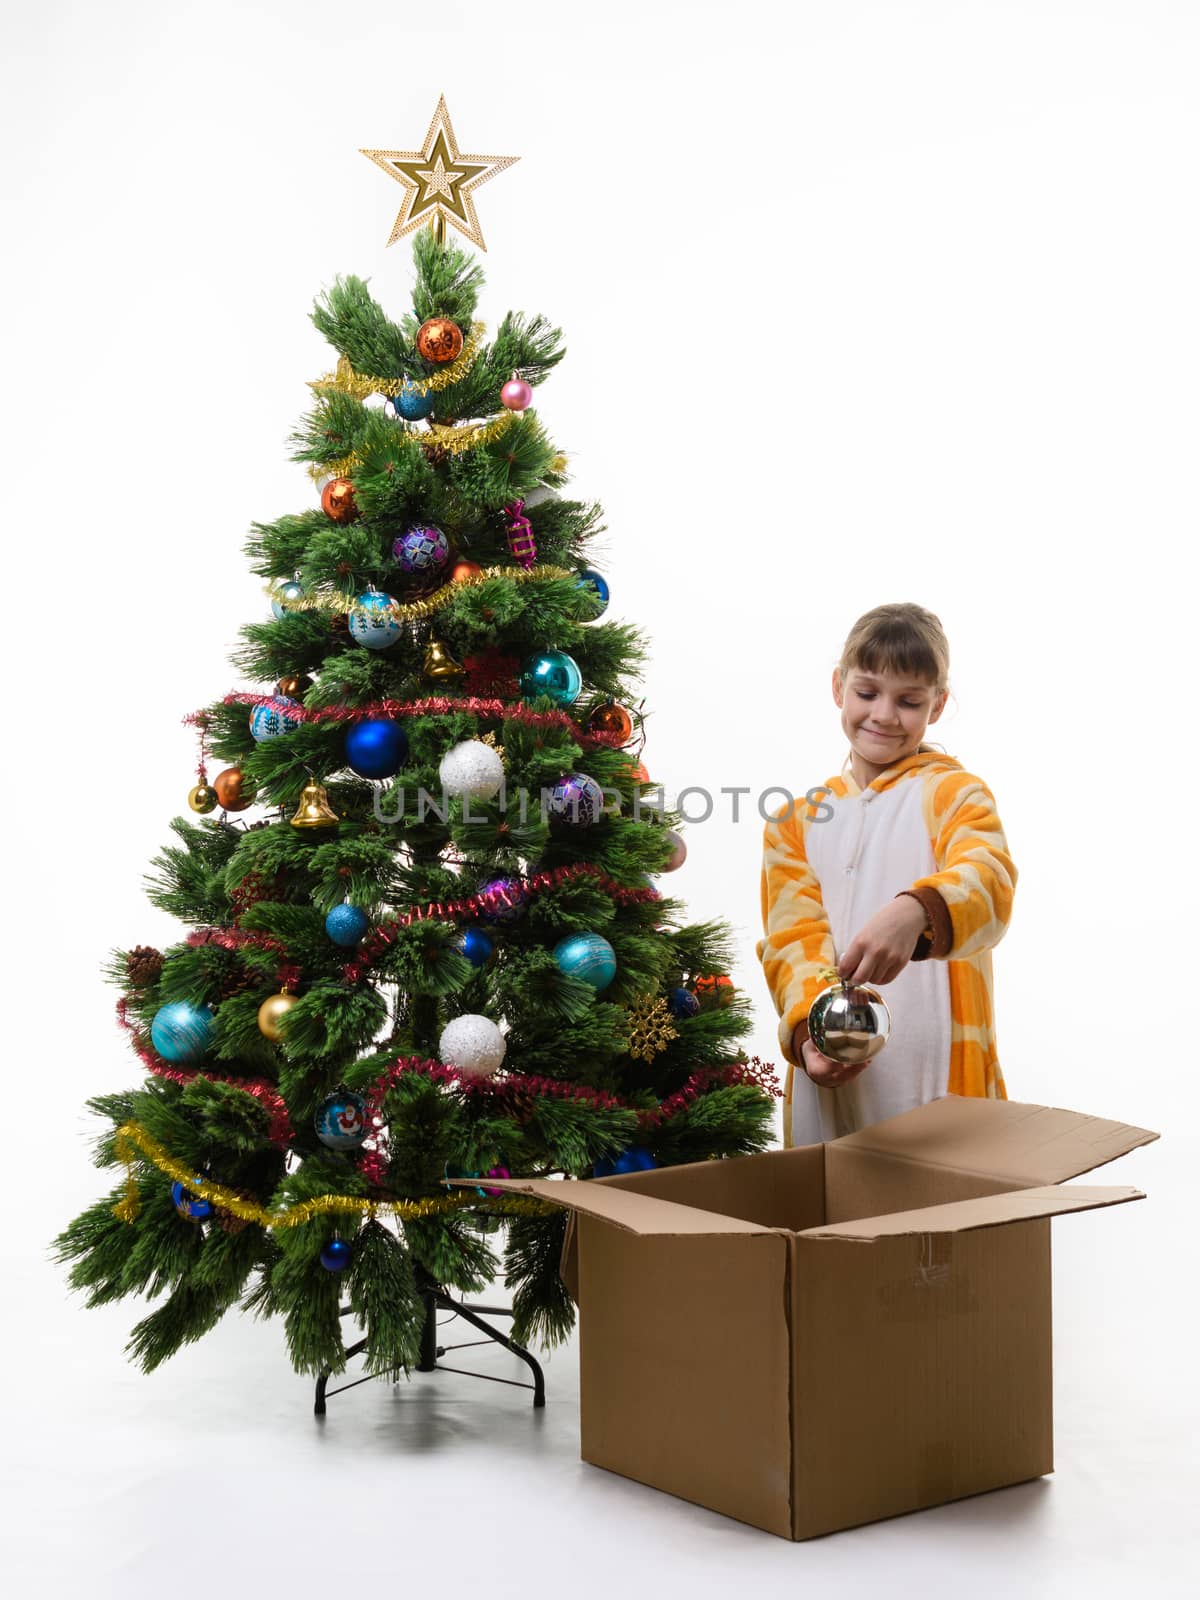 Girl examines Christmas decorations pulling them out of the Christmas tree